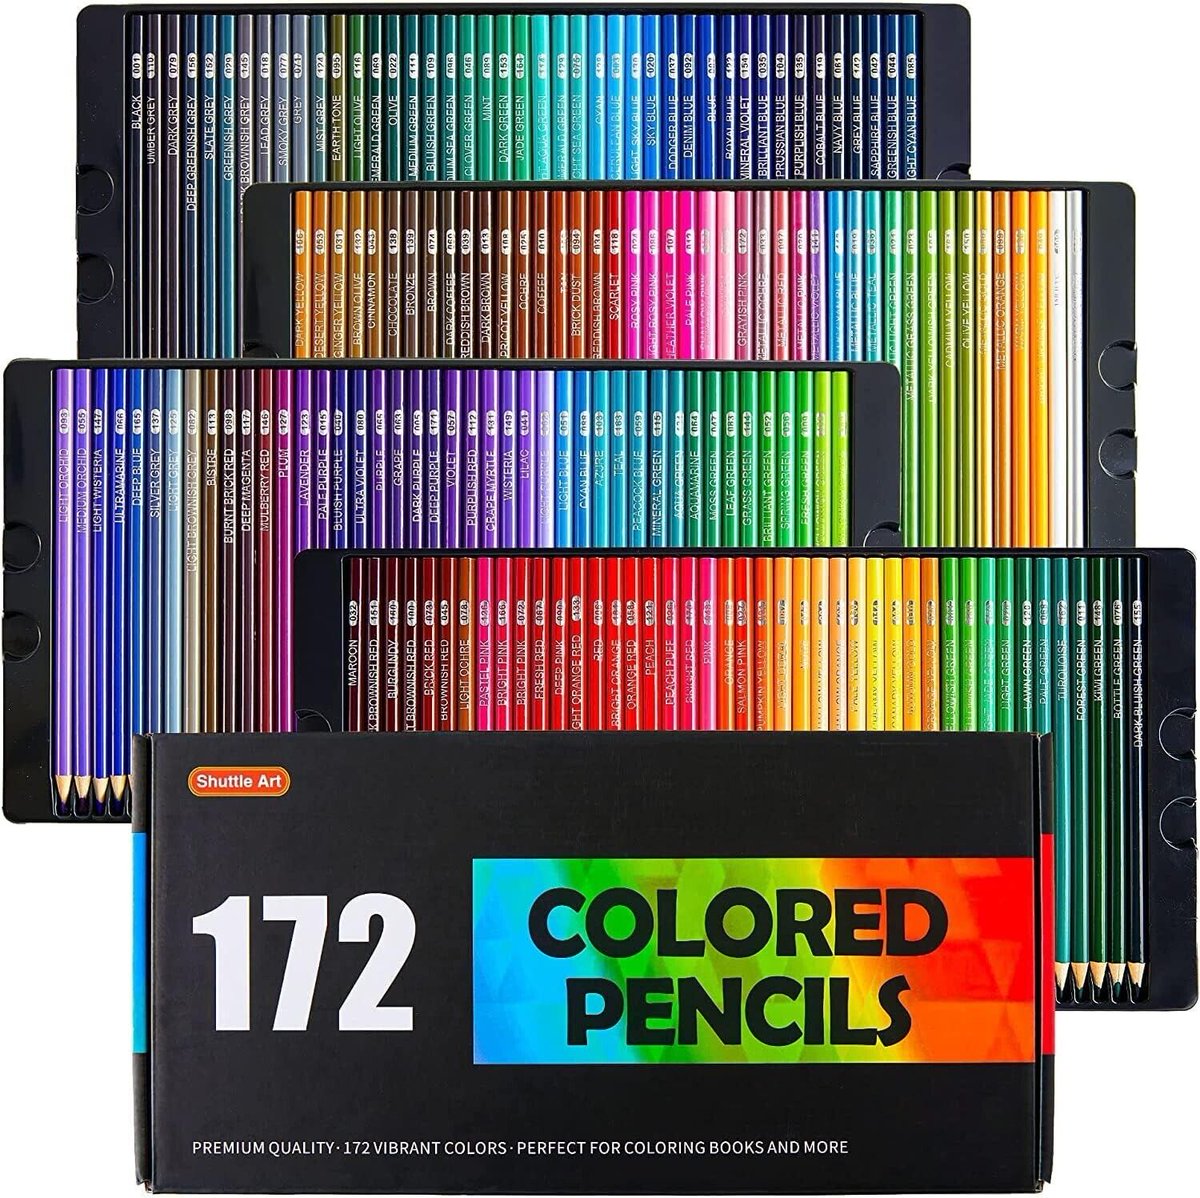 colored pencils 172 colors set children adults professionals artists gift New

URL : ebay.co.uk/itm/2962138866…

#ColorPencilArt #CreativeColors #VividVibes #ArtisticExpressions #DrawWithPassion #ColorfulCreations #SketchAndShade #PencilPerfection #ArtisticTools #ShadeMasters